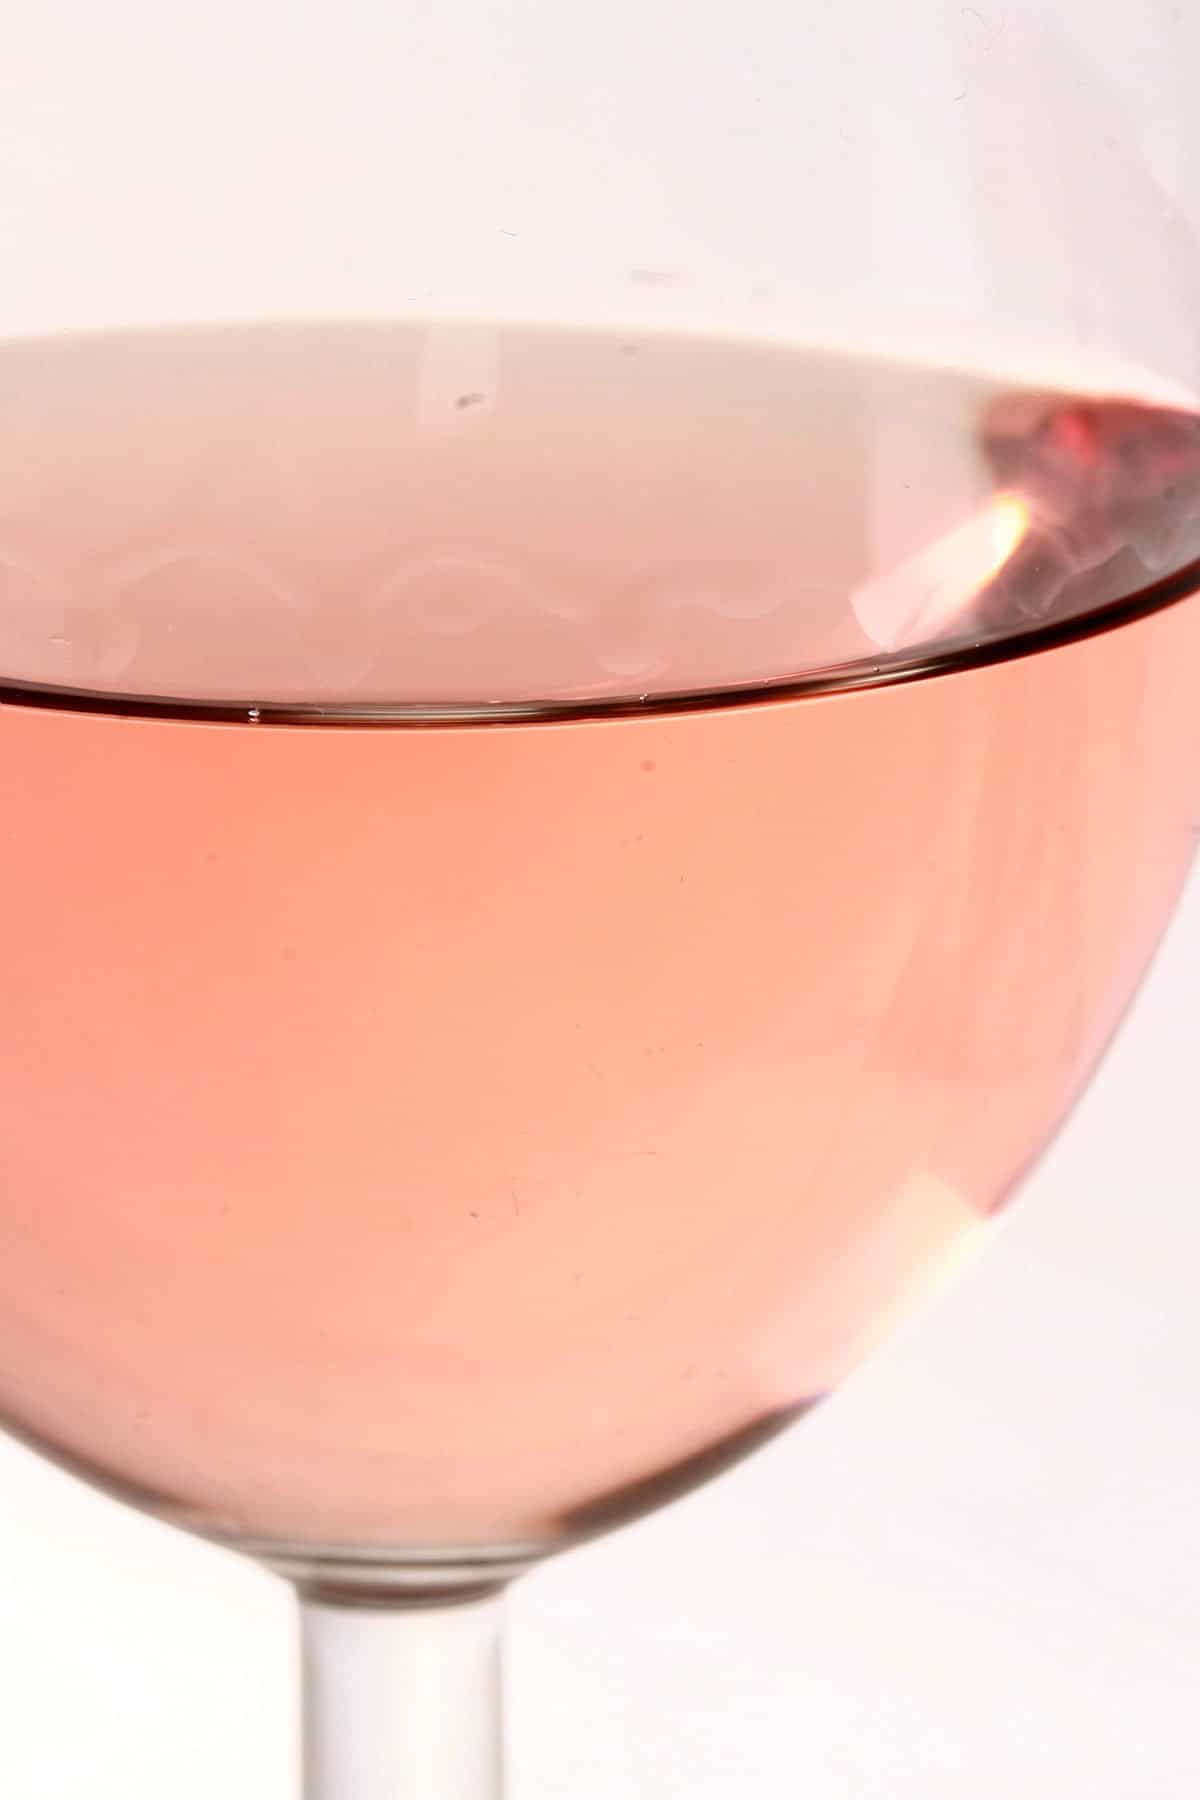 Close up view of a glass of Rose wine.